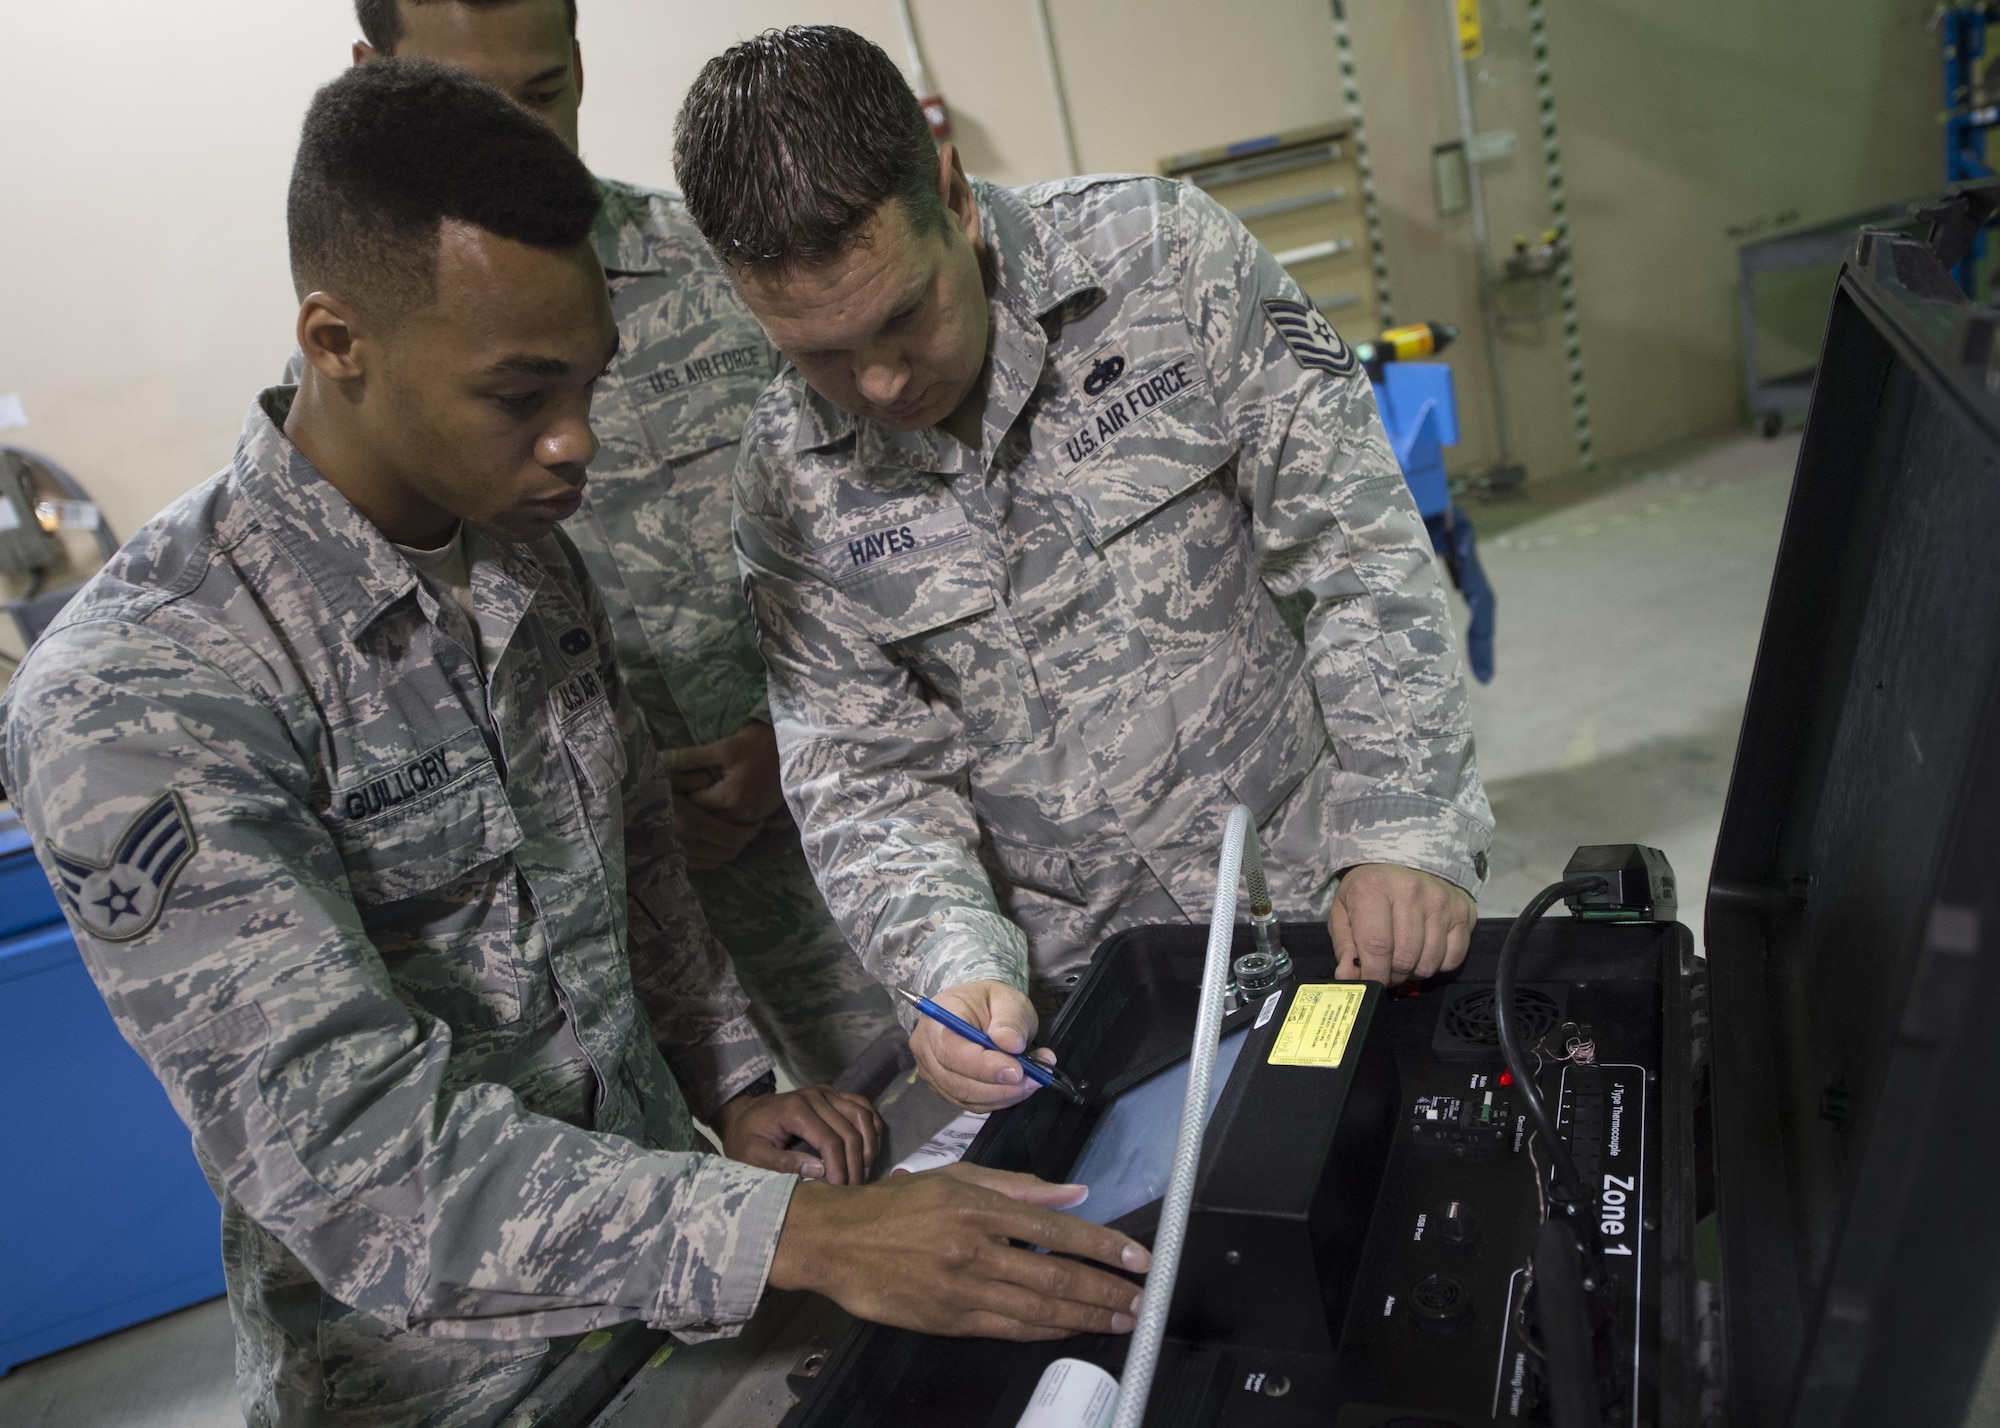 Senior Airman Devon Guillory and Tech. Sgt. Adam Hayes, 49th Maintenance Squadron aircraft structural maintenance technicians, analyze readings on a hot bonder, Dec. 14, 2016, at Holloman Air Force Base, N.M. The hot bonder adjusts the temperature for vacuum repairs on composite structures. Once the composite structure is repaired, it can be sanded, painted and returned to the aircraft. (U.S. Air Force photo by Senior Airman Emily Kenney) 